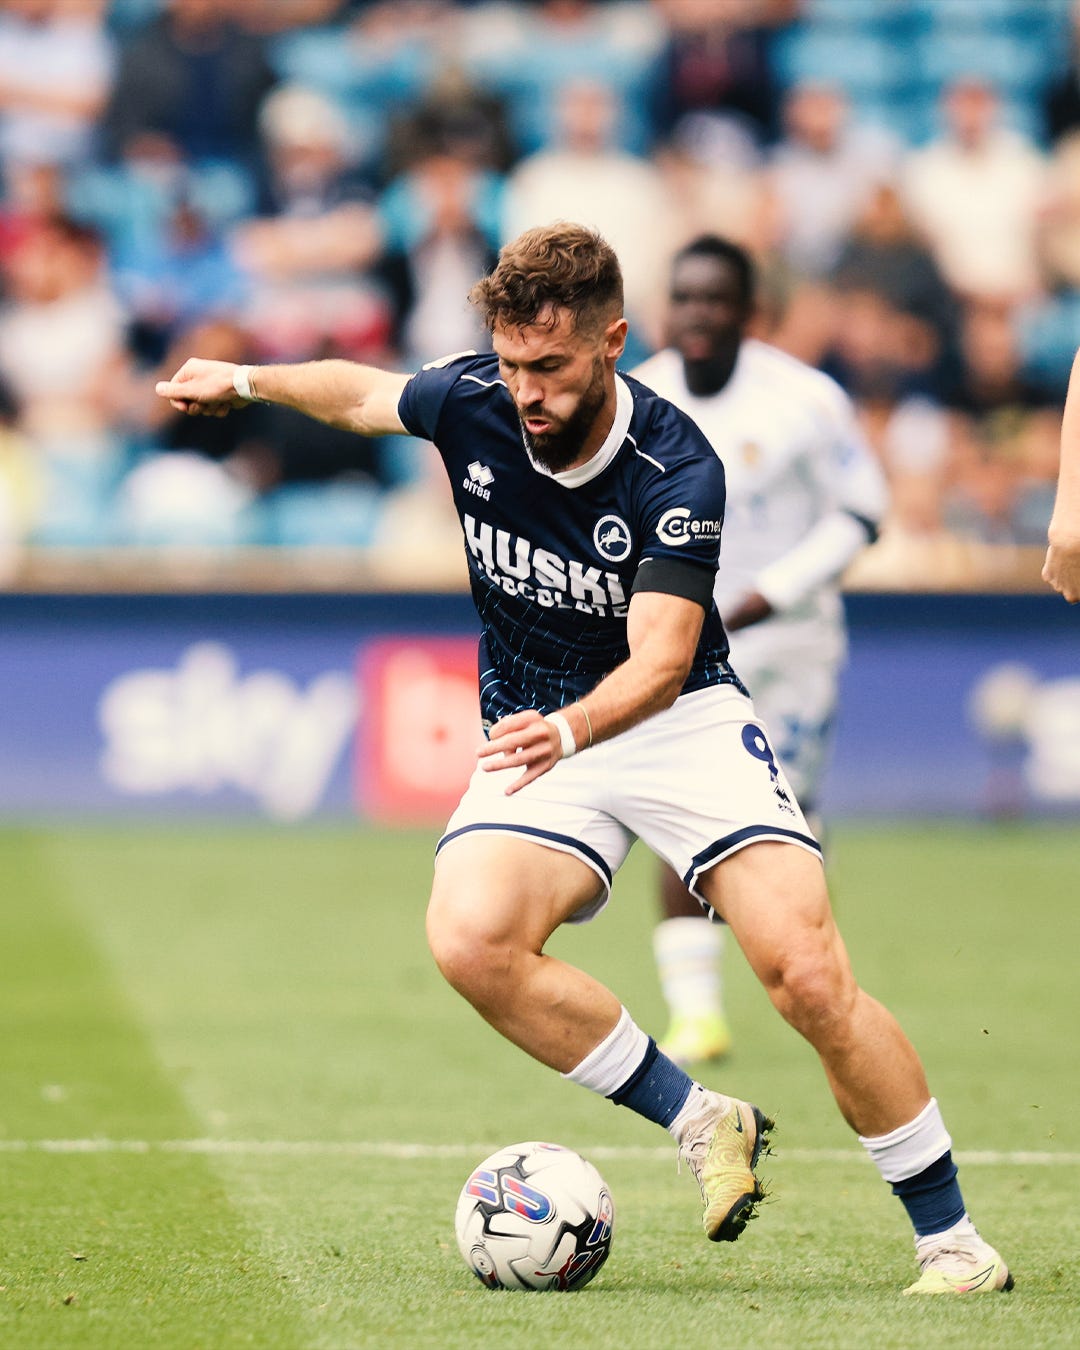 Leeds extinguish Millwall's fire as Joël Piroe double sets up dominant win, Championship